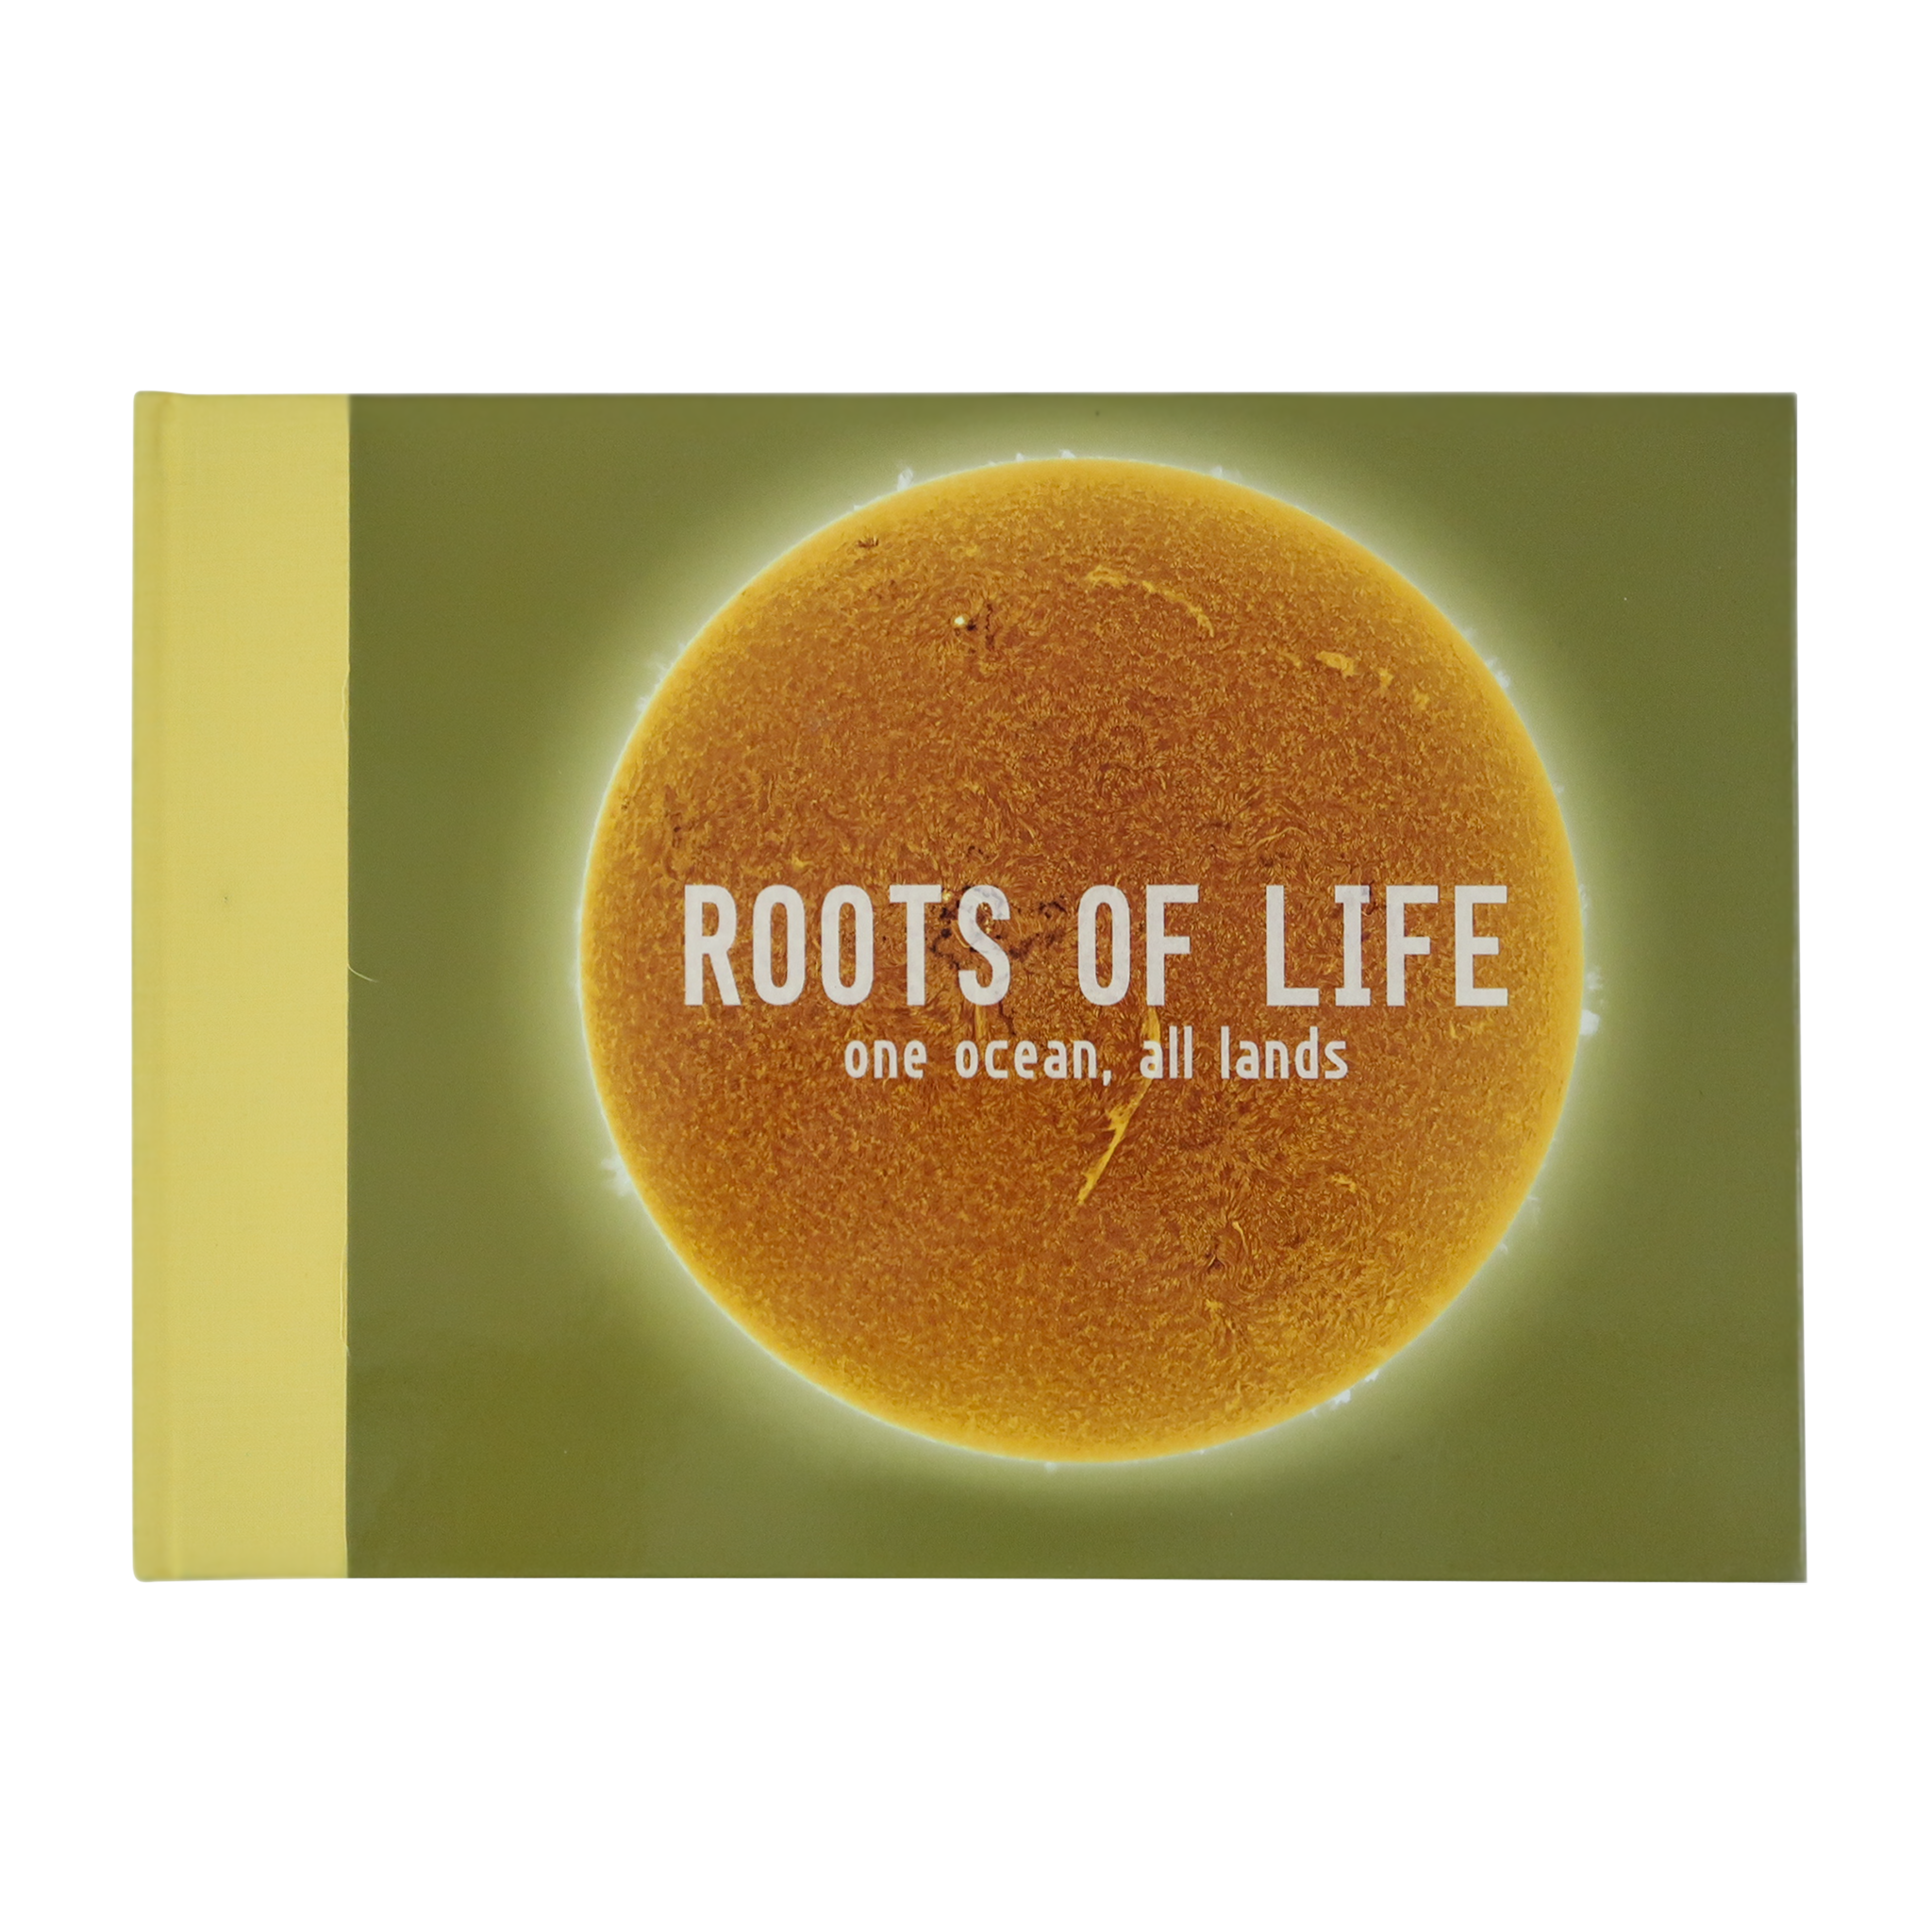 Roots of Life Vol. 7 "Yellow: The Sun" (2013)